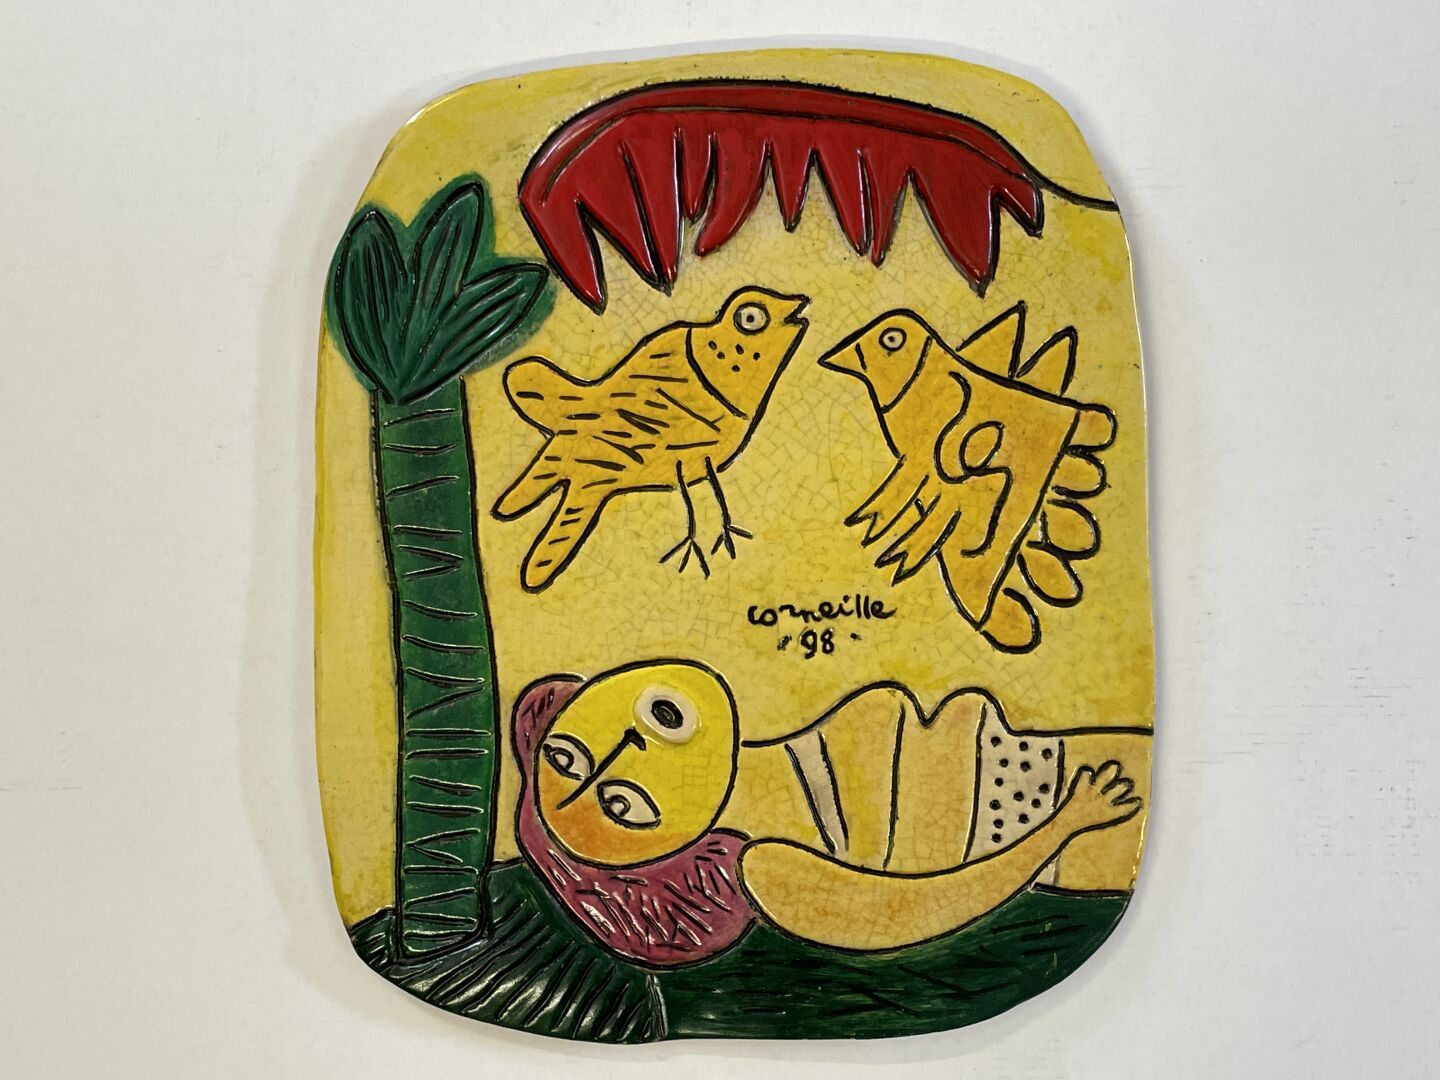 Null CORNEILLE (1922-2010)

Ceramic plate

Signed and dated 98.

40 x 34 cm.